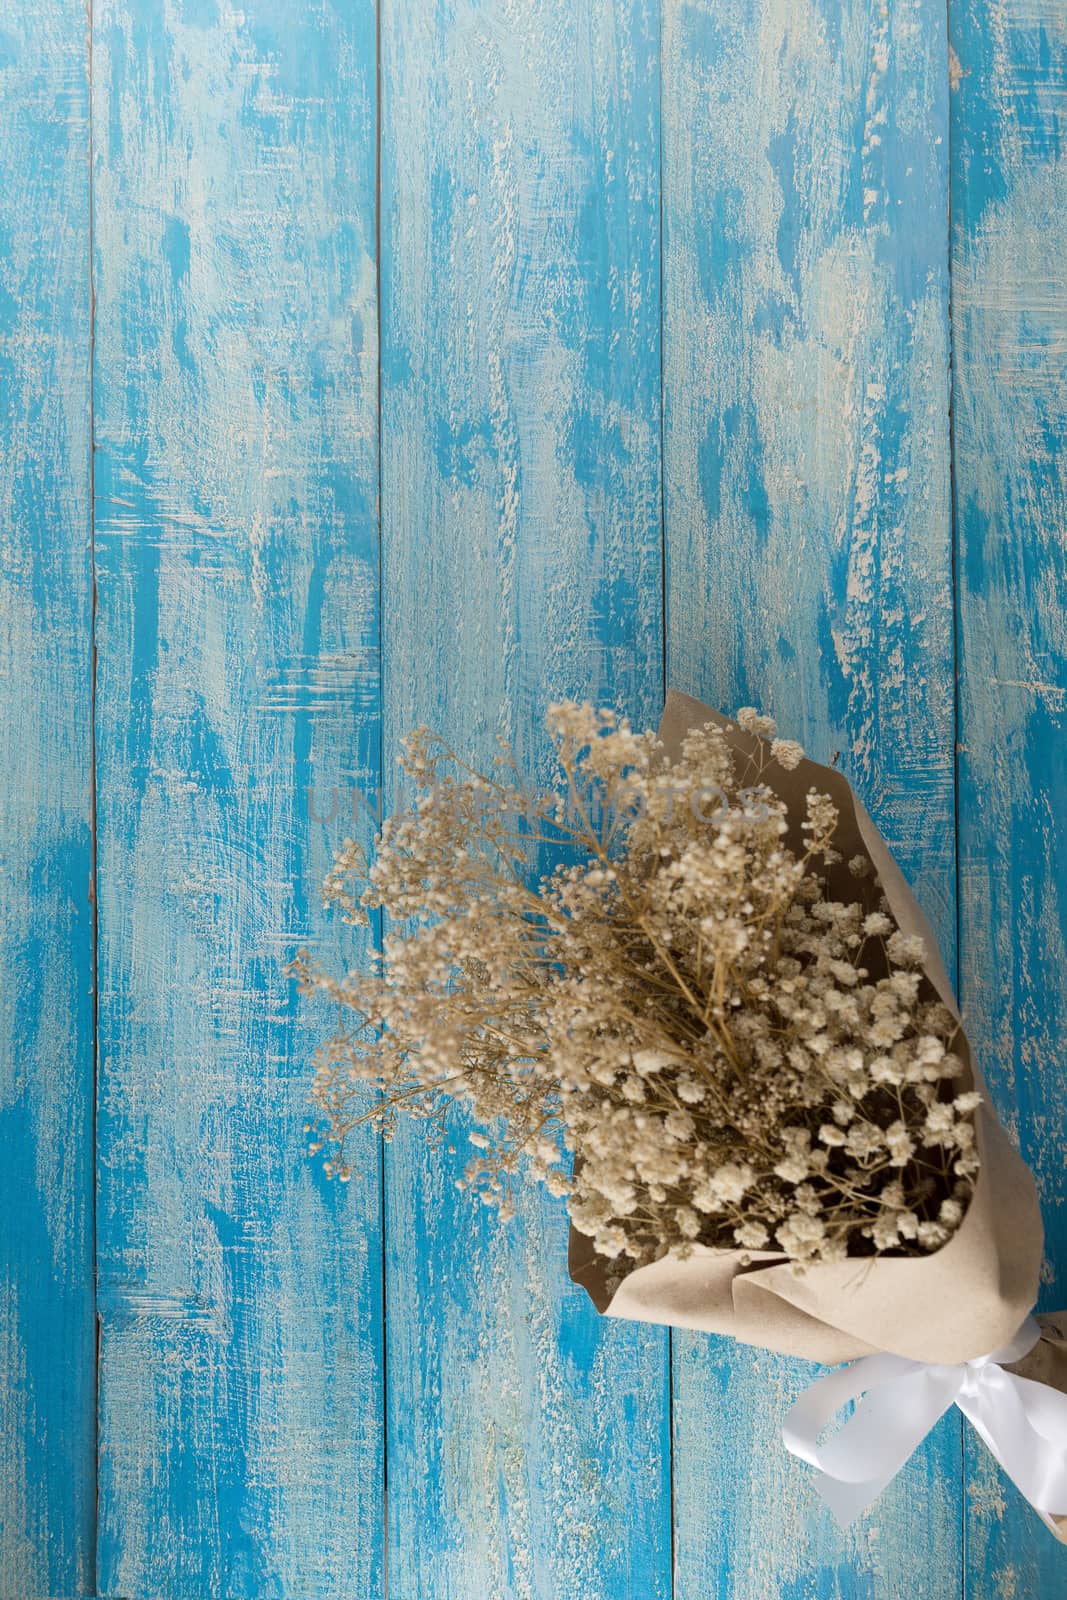 Dry bouquet on a blue Rustic Background.